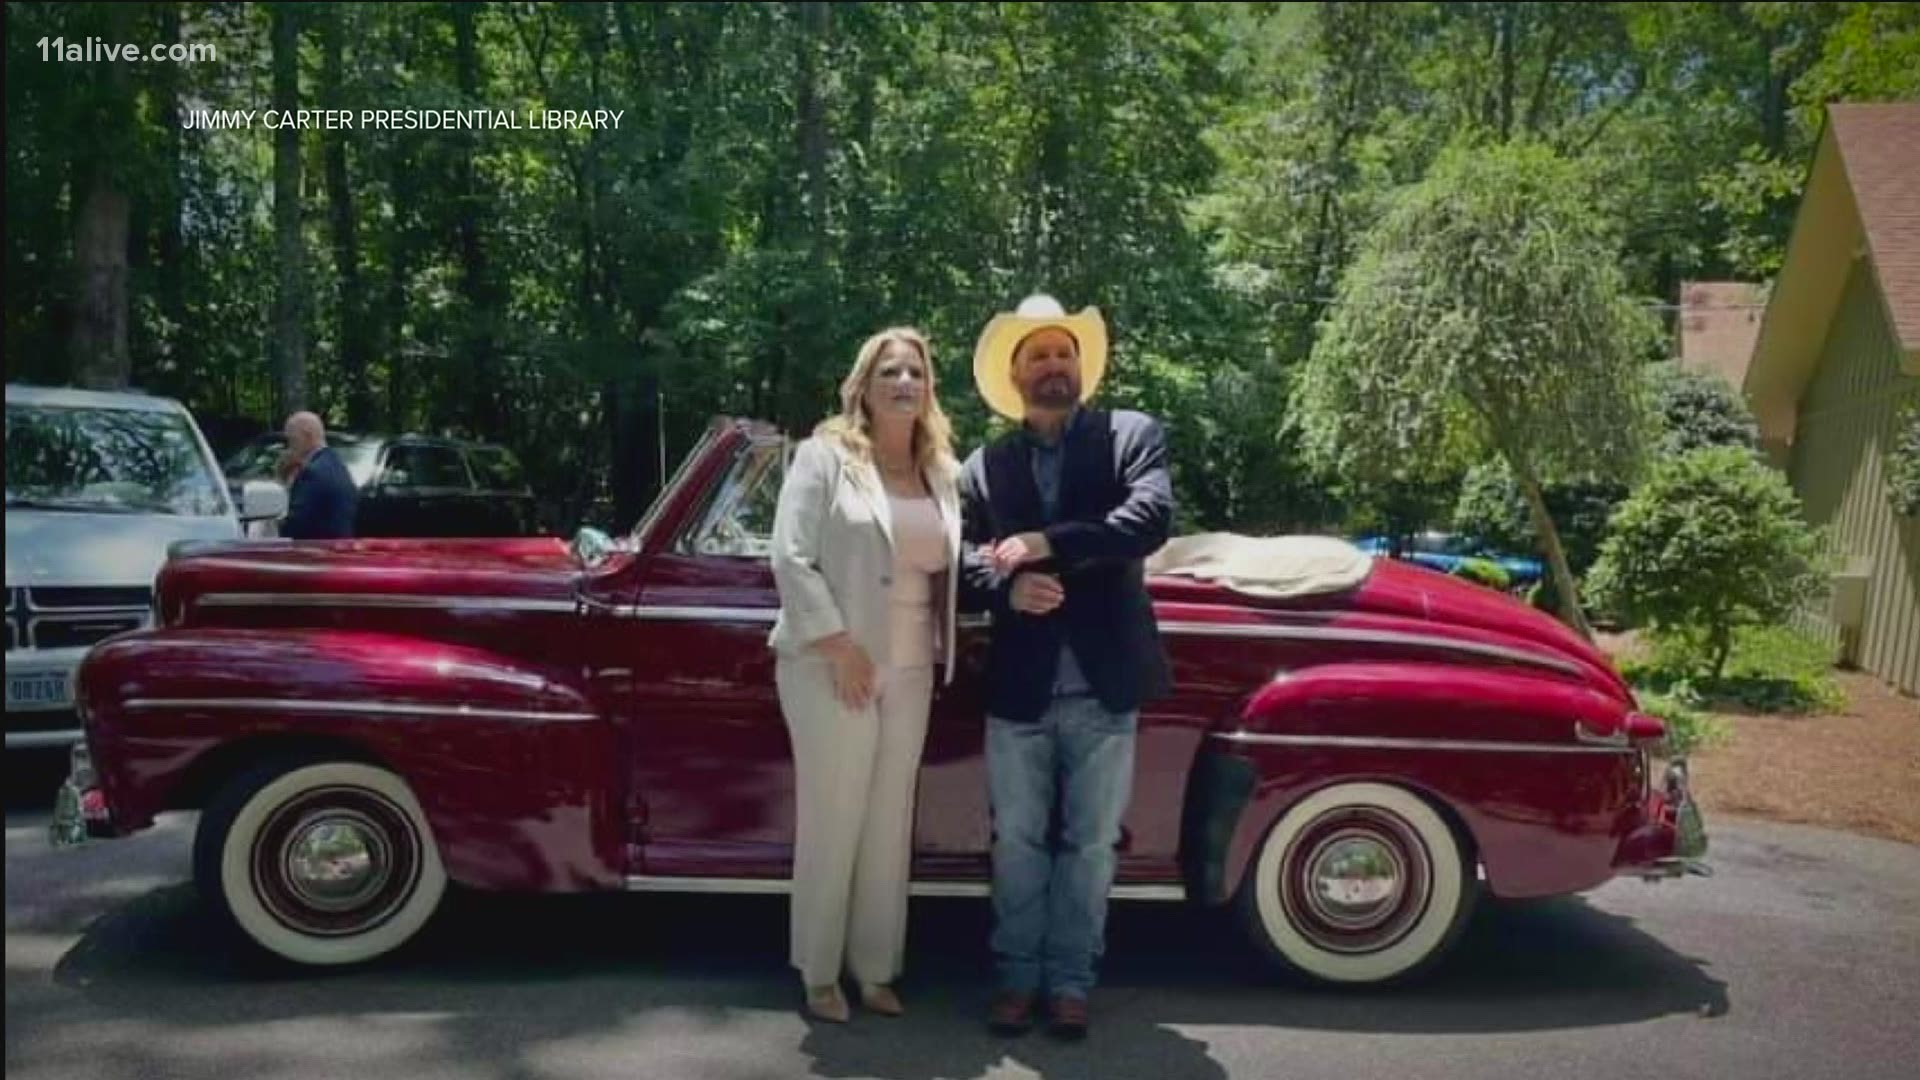 It's a restored 1946 car gifted by Garth Brooks and Trisha Yearwood.